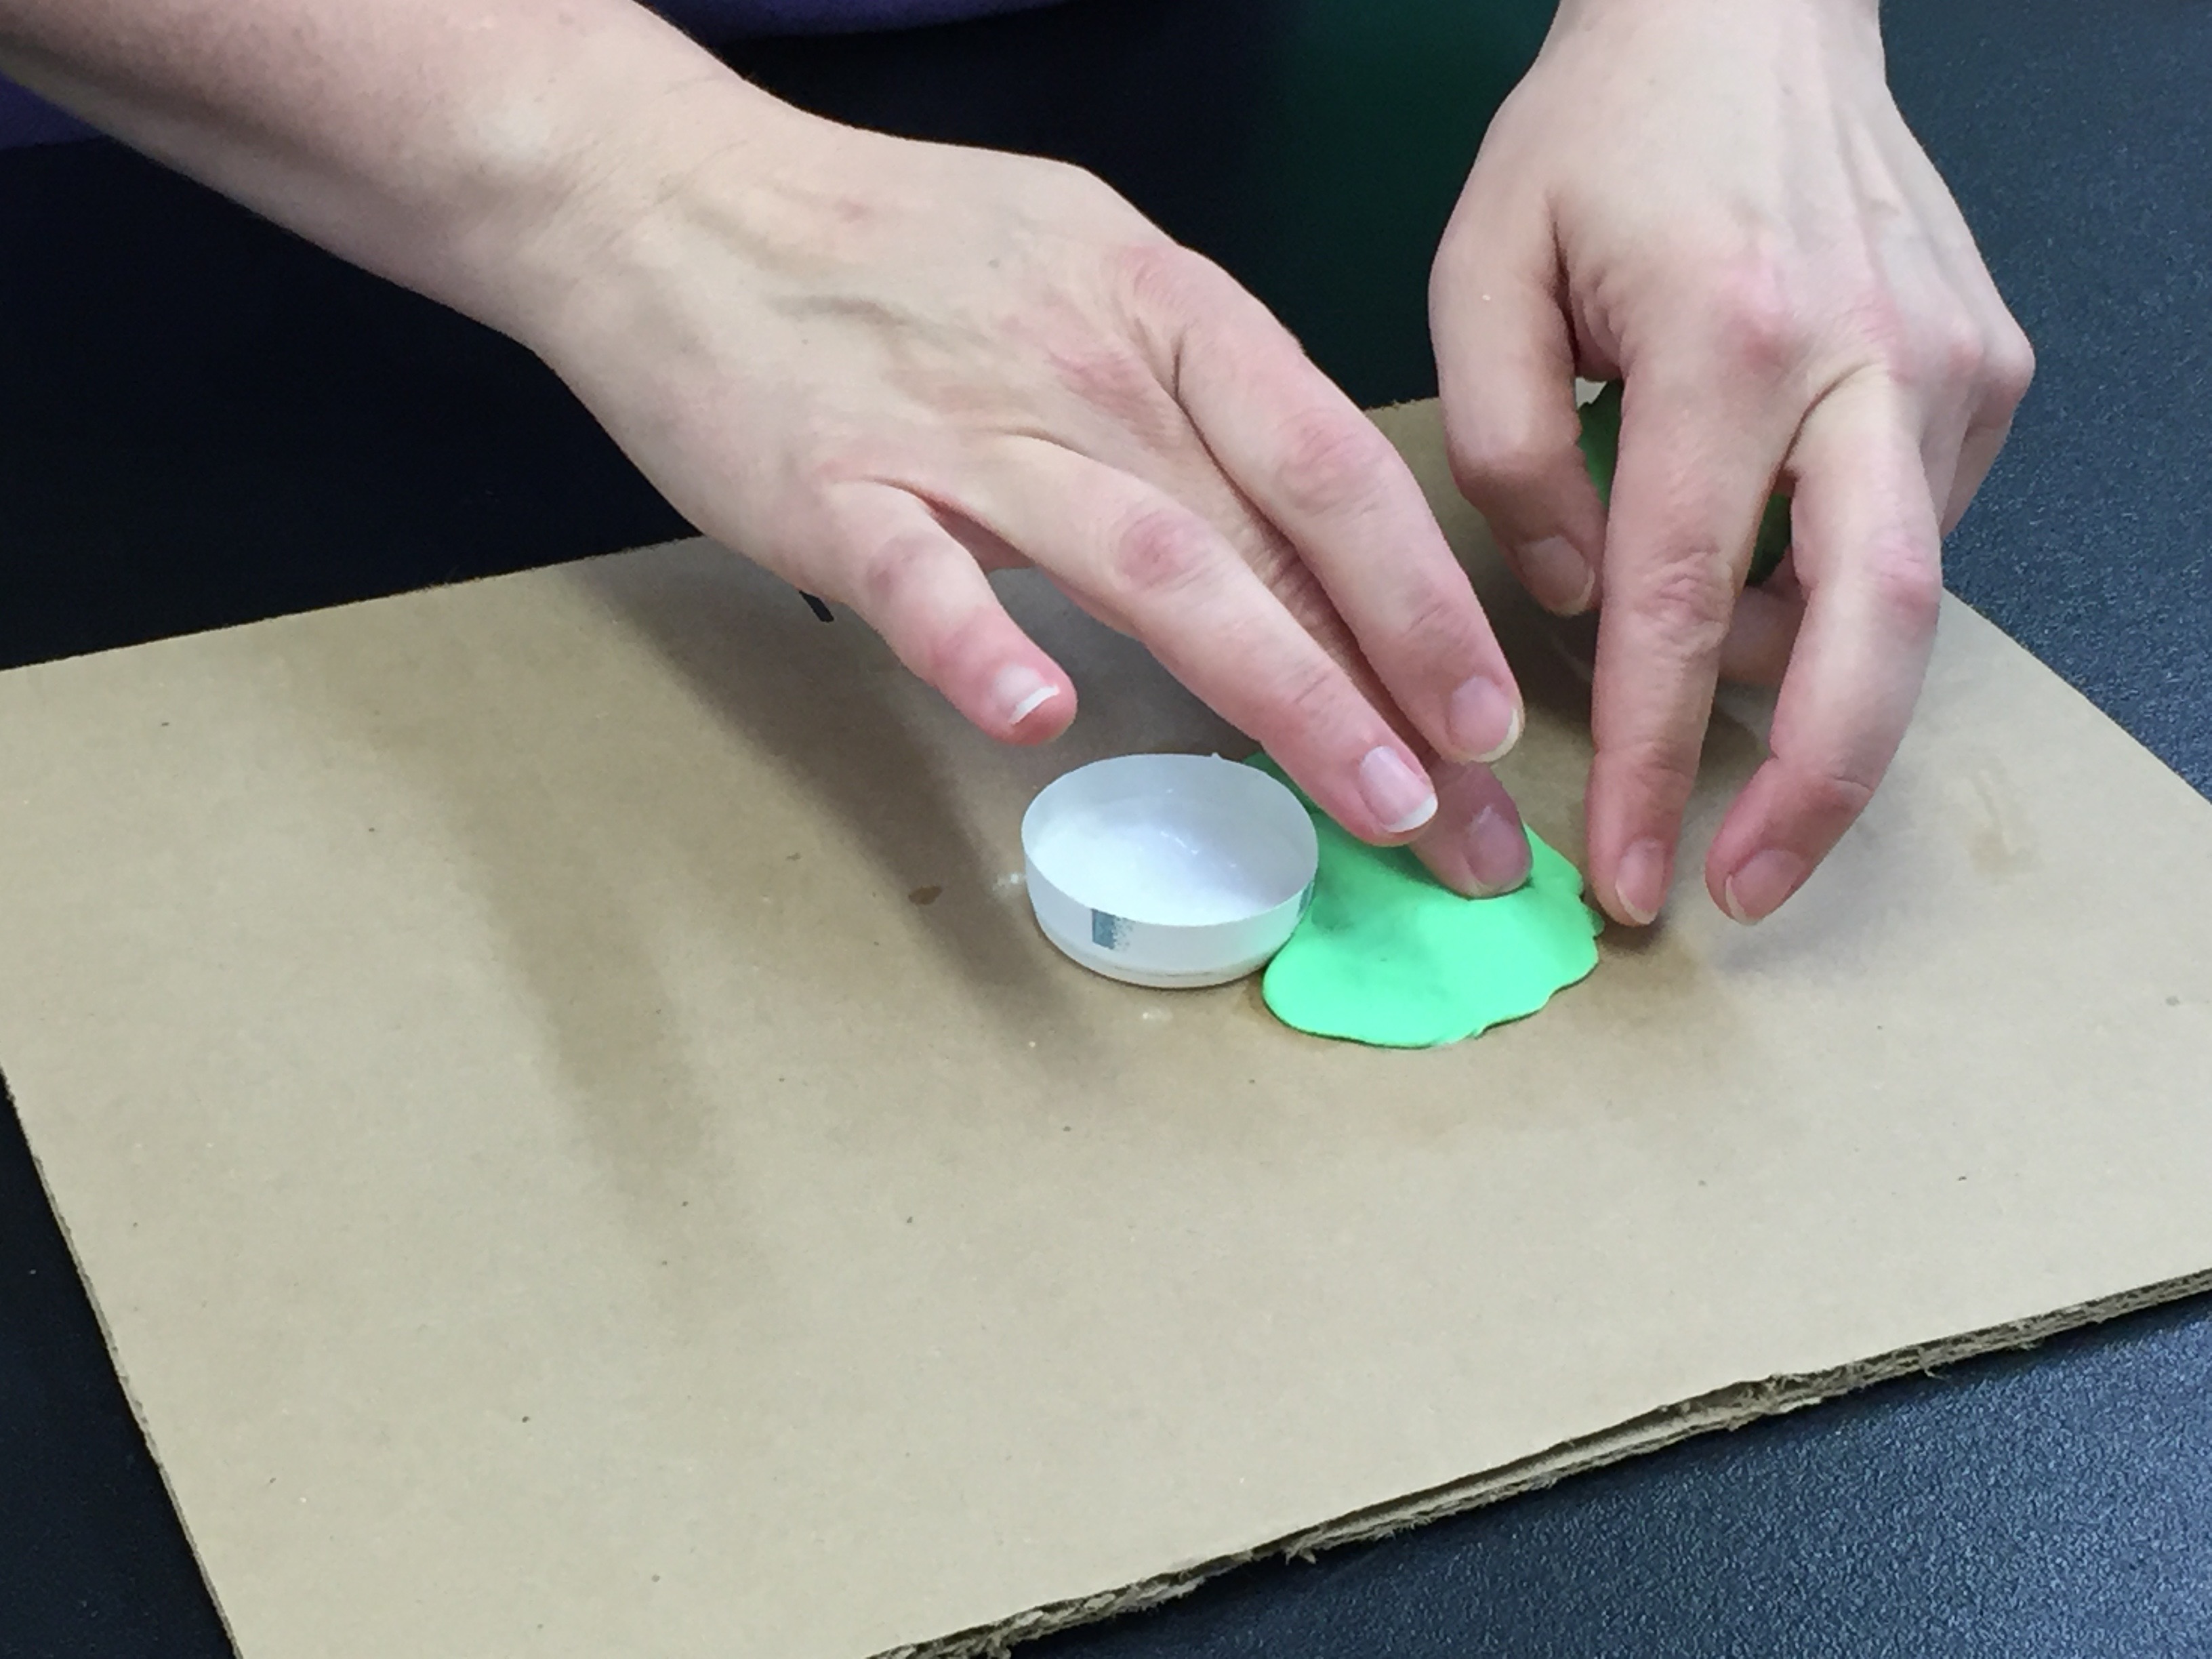 placing the play dough on the cardboard